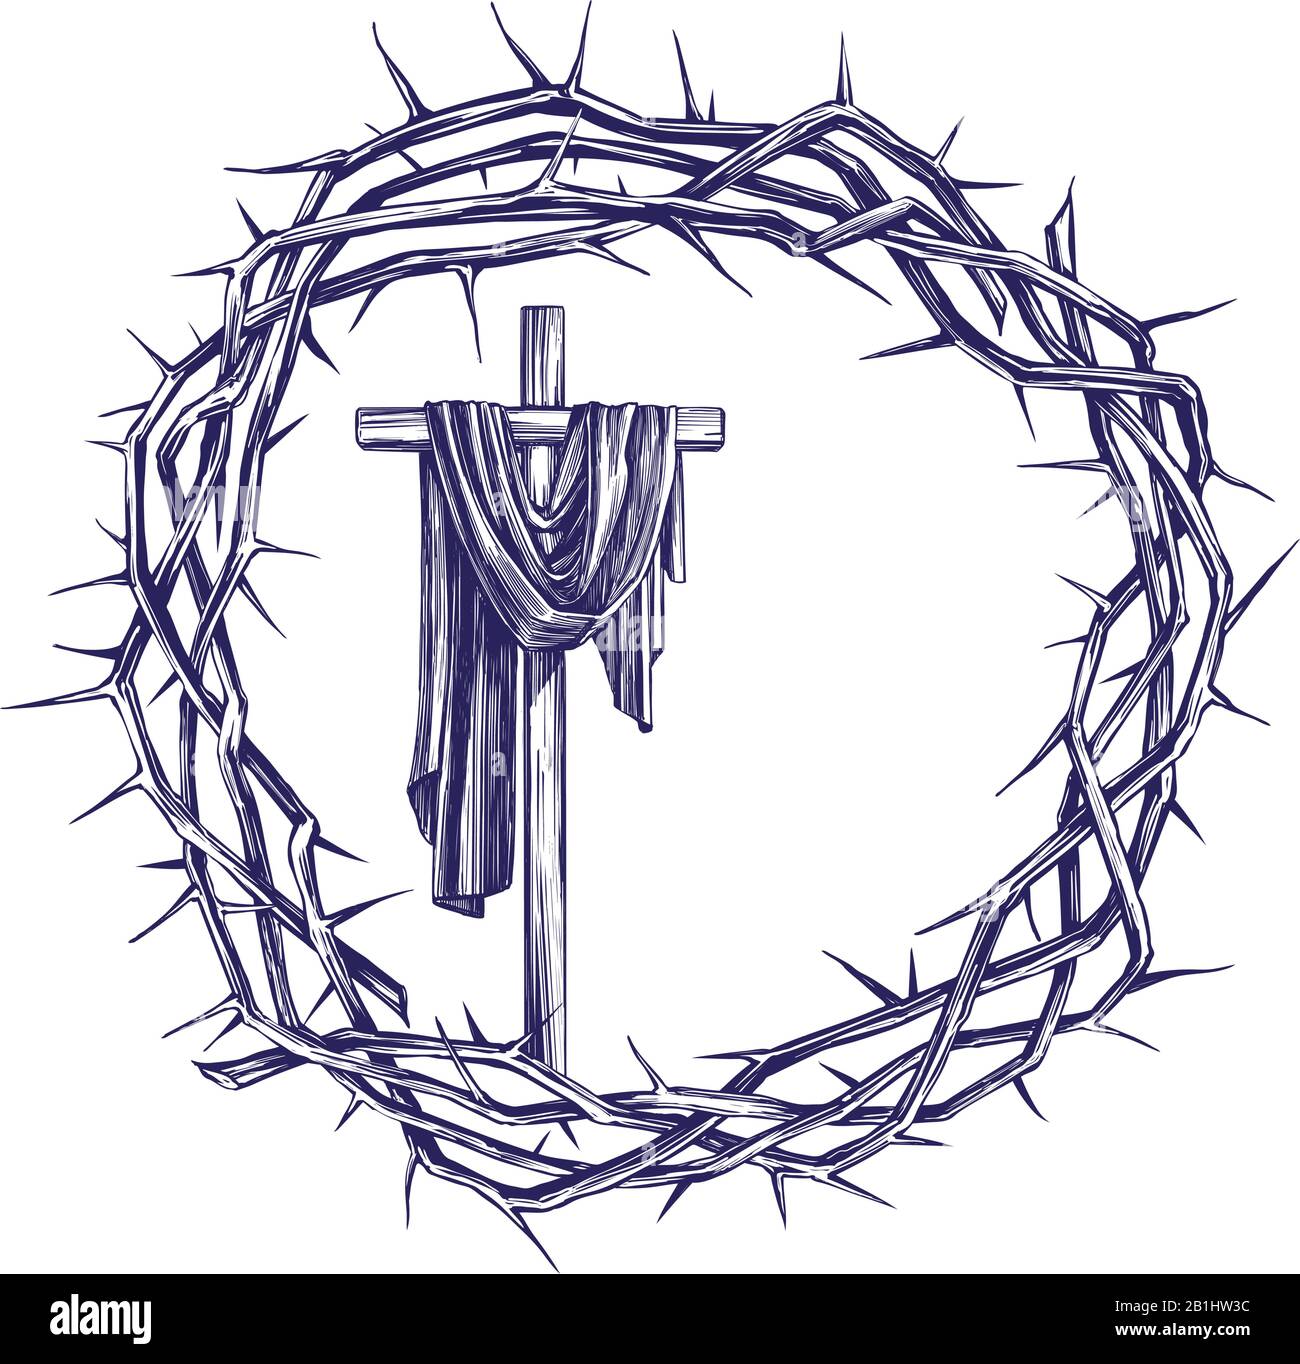 cross and crown of thorns, easter religious symbol of Christianity hand drawn vector illustration sketch. Stock Vector